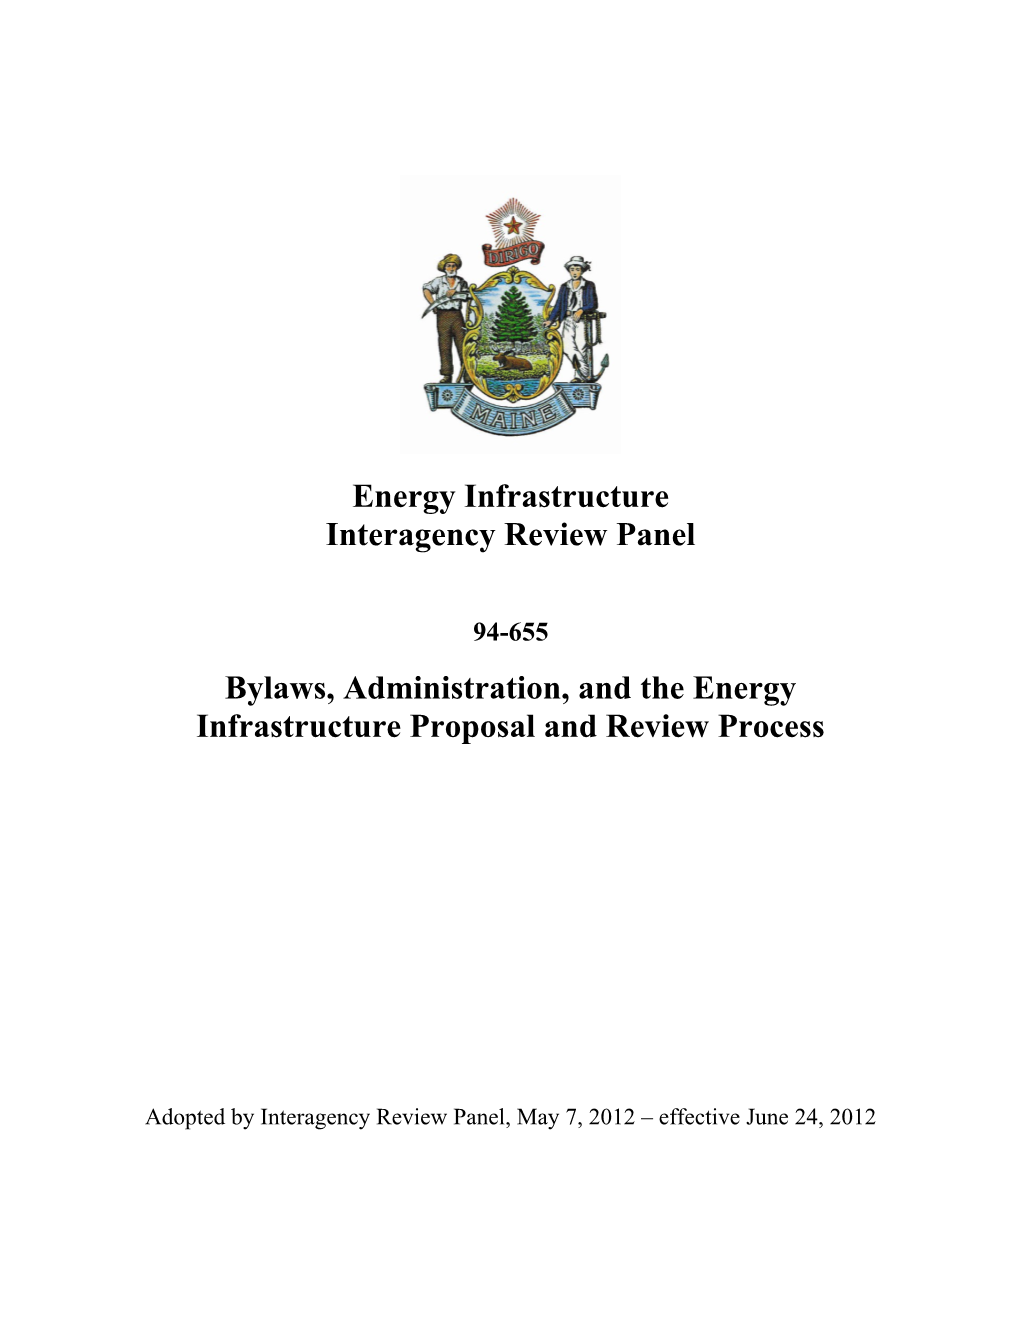 Bylaws, Administration, and the Energy Infrastructure Proposal and Review Process